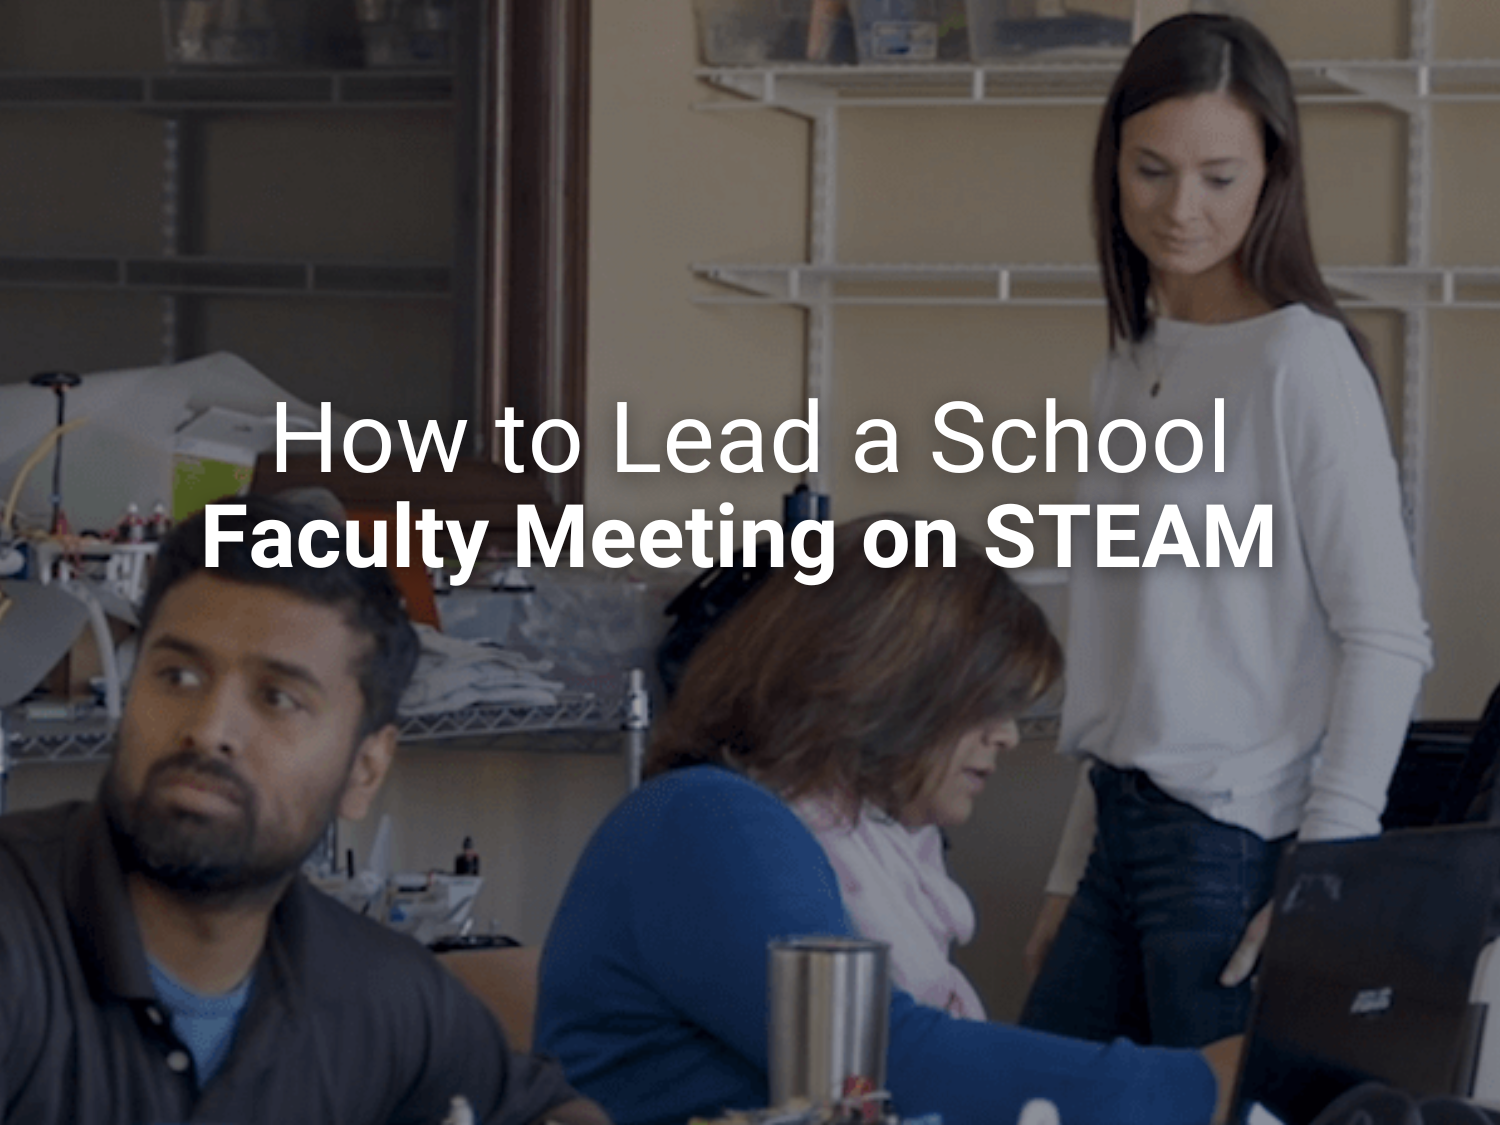 How to Lead a School Faculty Meeting on STEAM